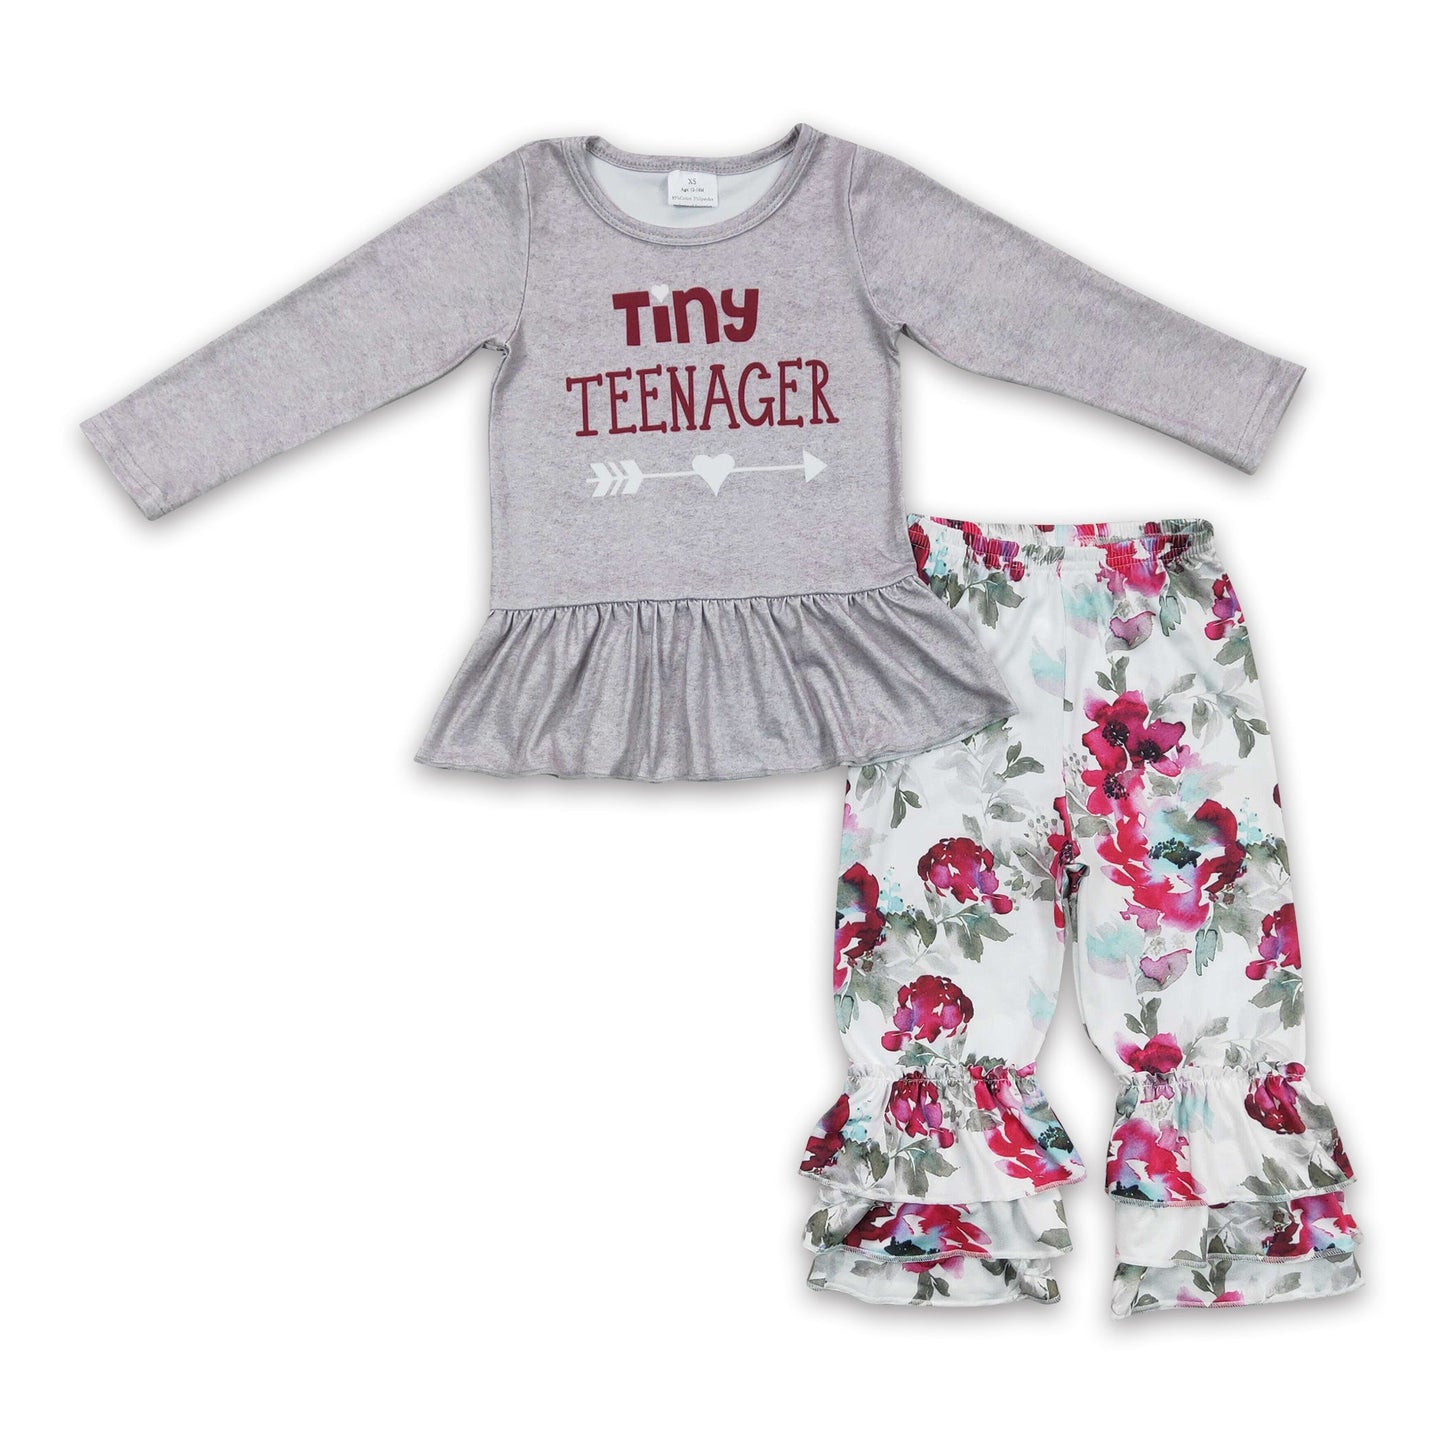 Tiny teenager grey top triple ruffle pants children clothing outfits